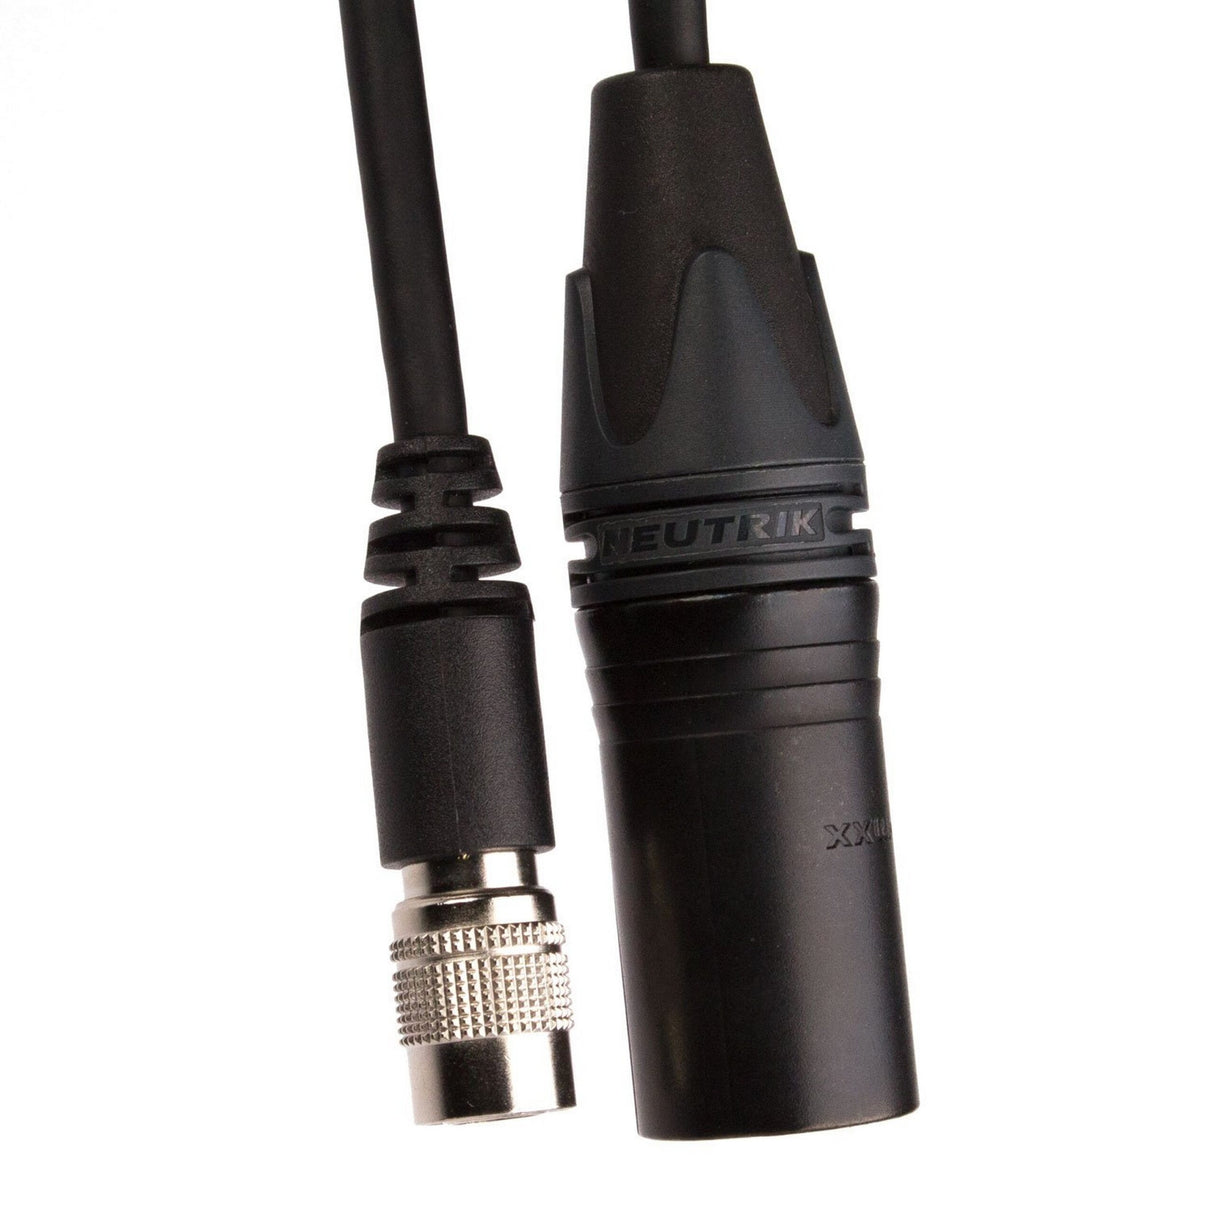 Teradek 11-1415 XLR Full Size 4-Pin Power Cable for MK3.1 Receiver